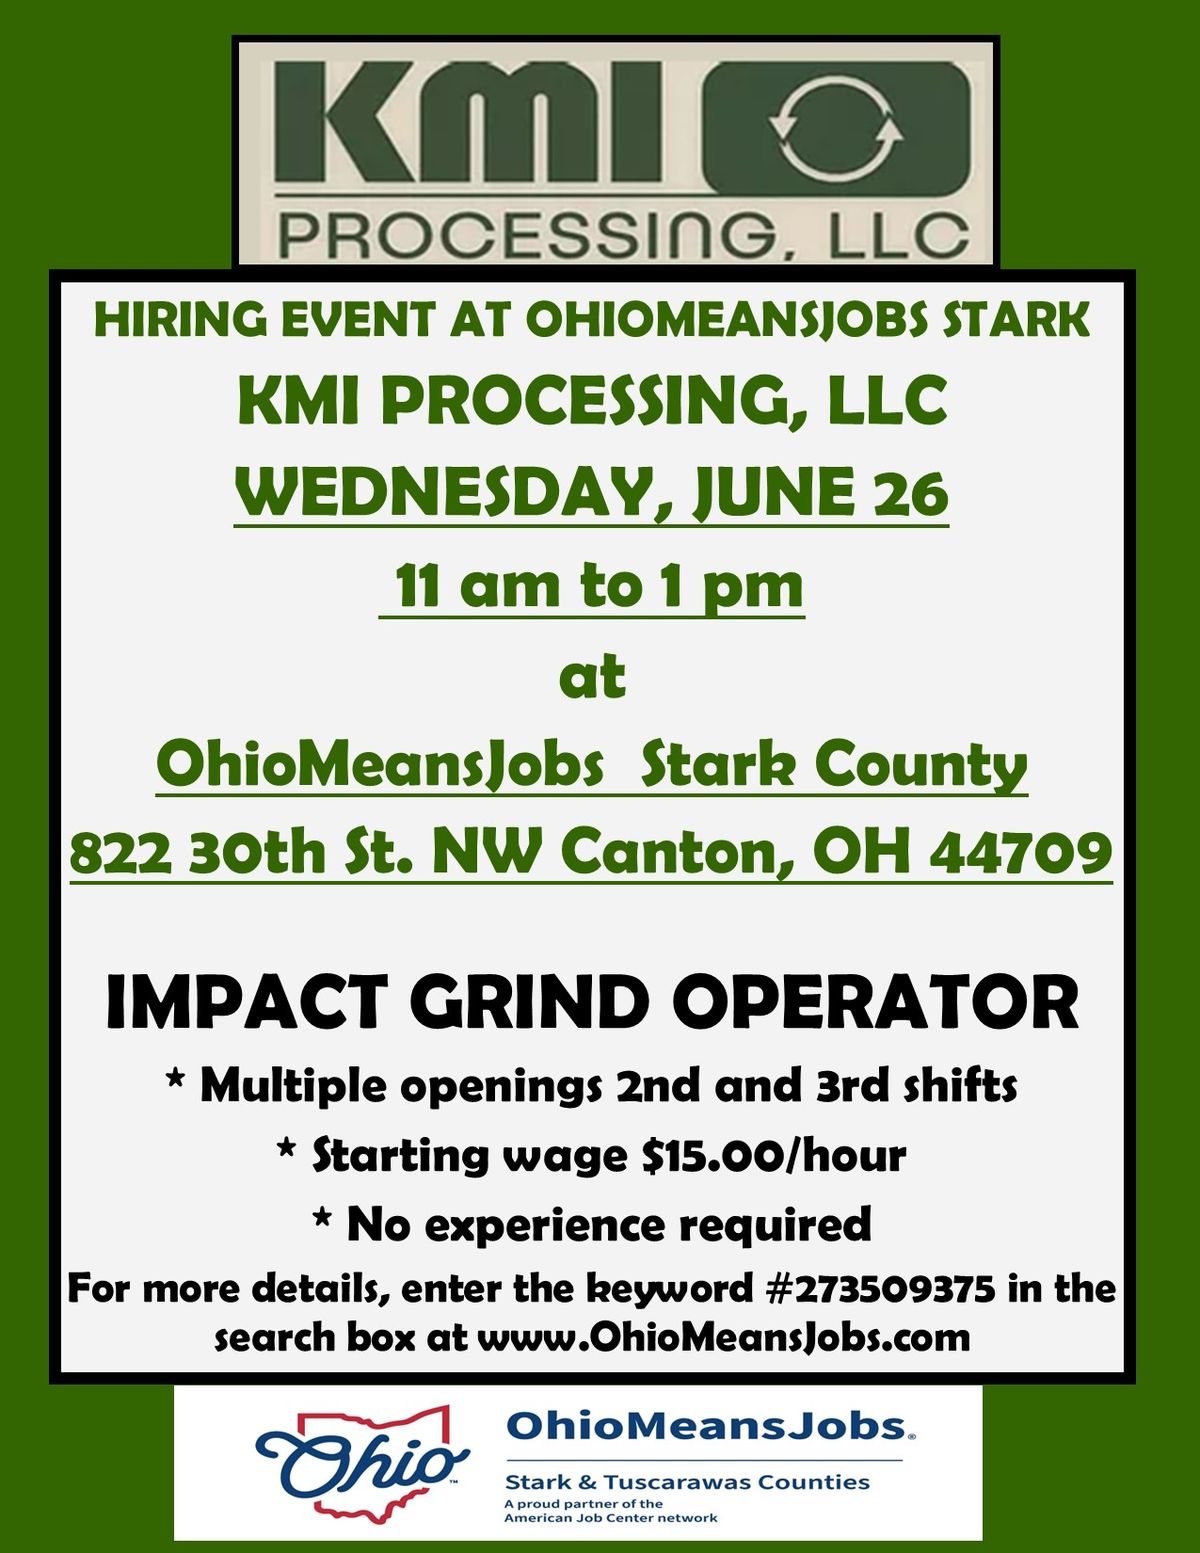 KMI Processing, LLC at OhioMeansJobs Stark County